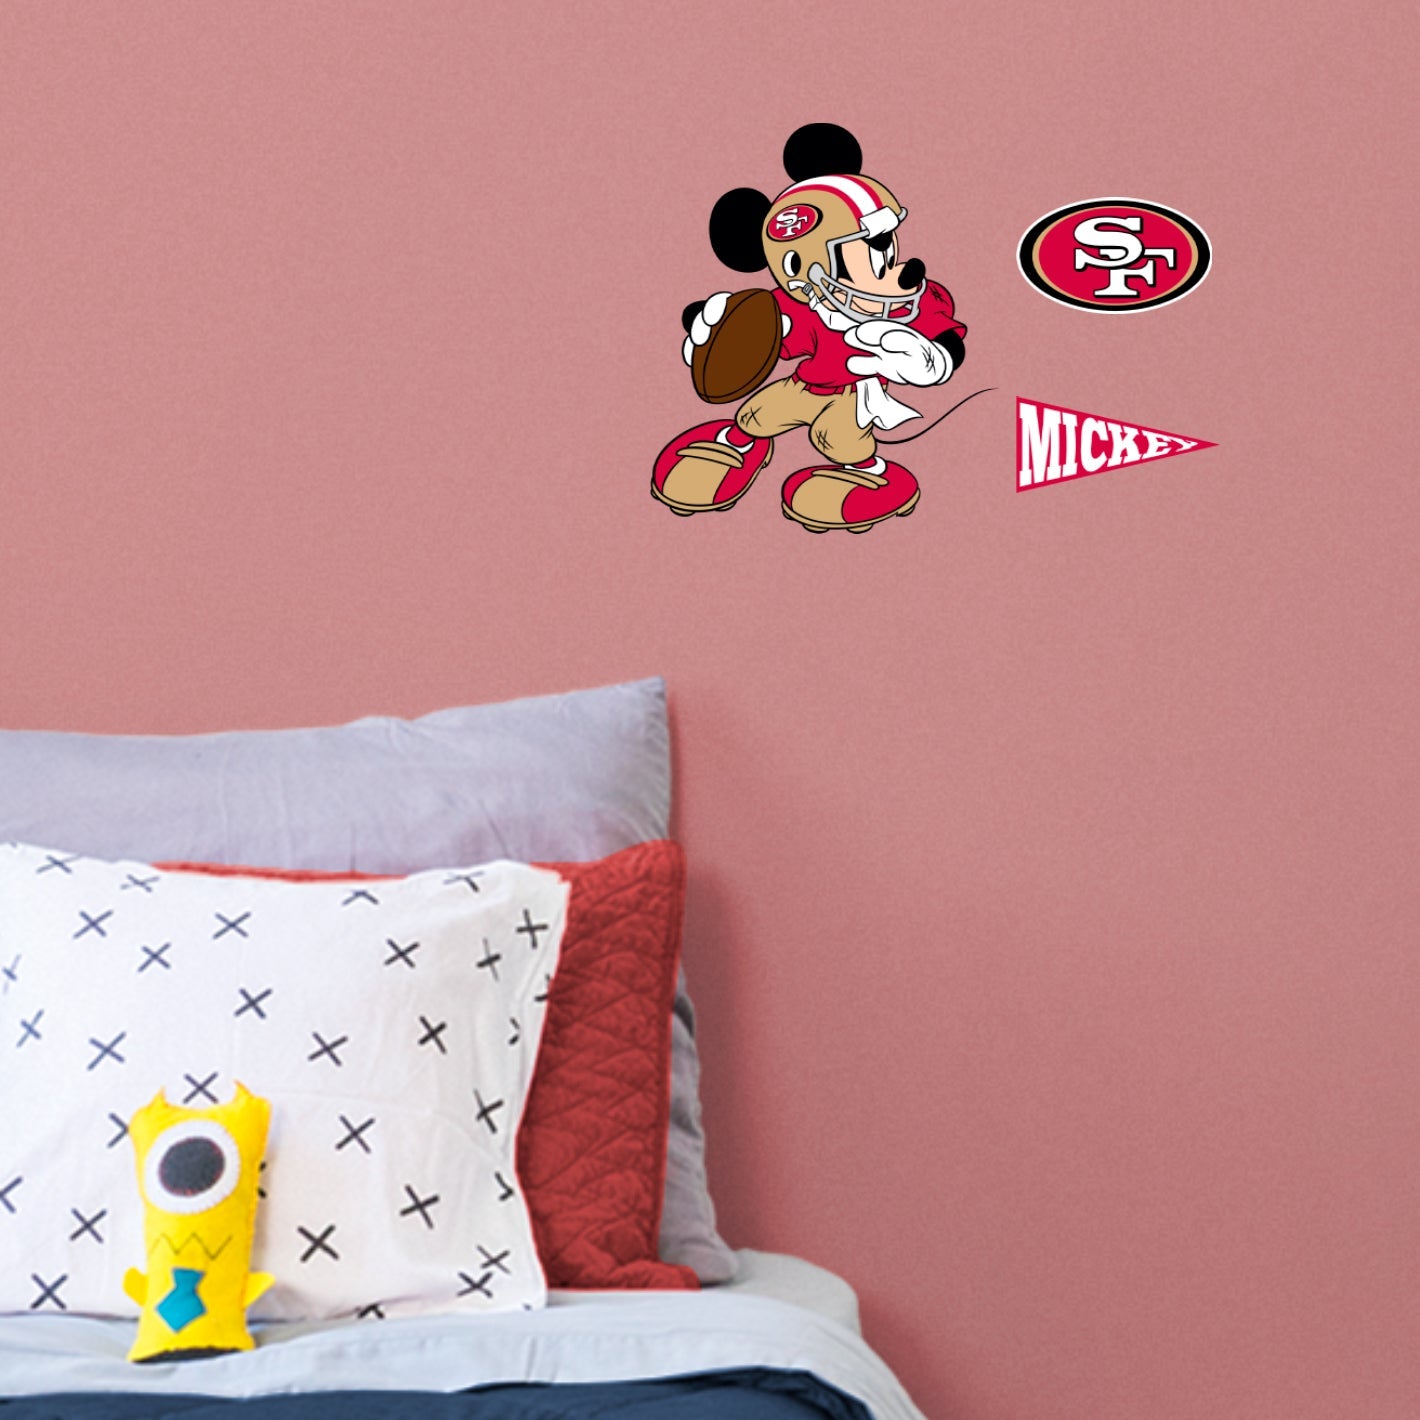 San Francisco 49ers: Mickey Mouse - Officially Licensed NFL Removable Adhesive Decal